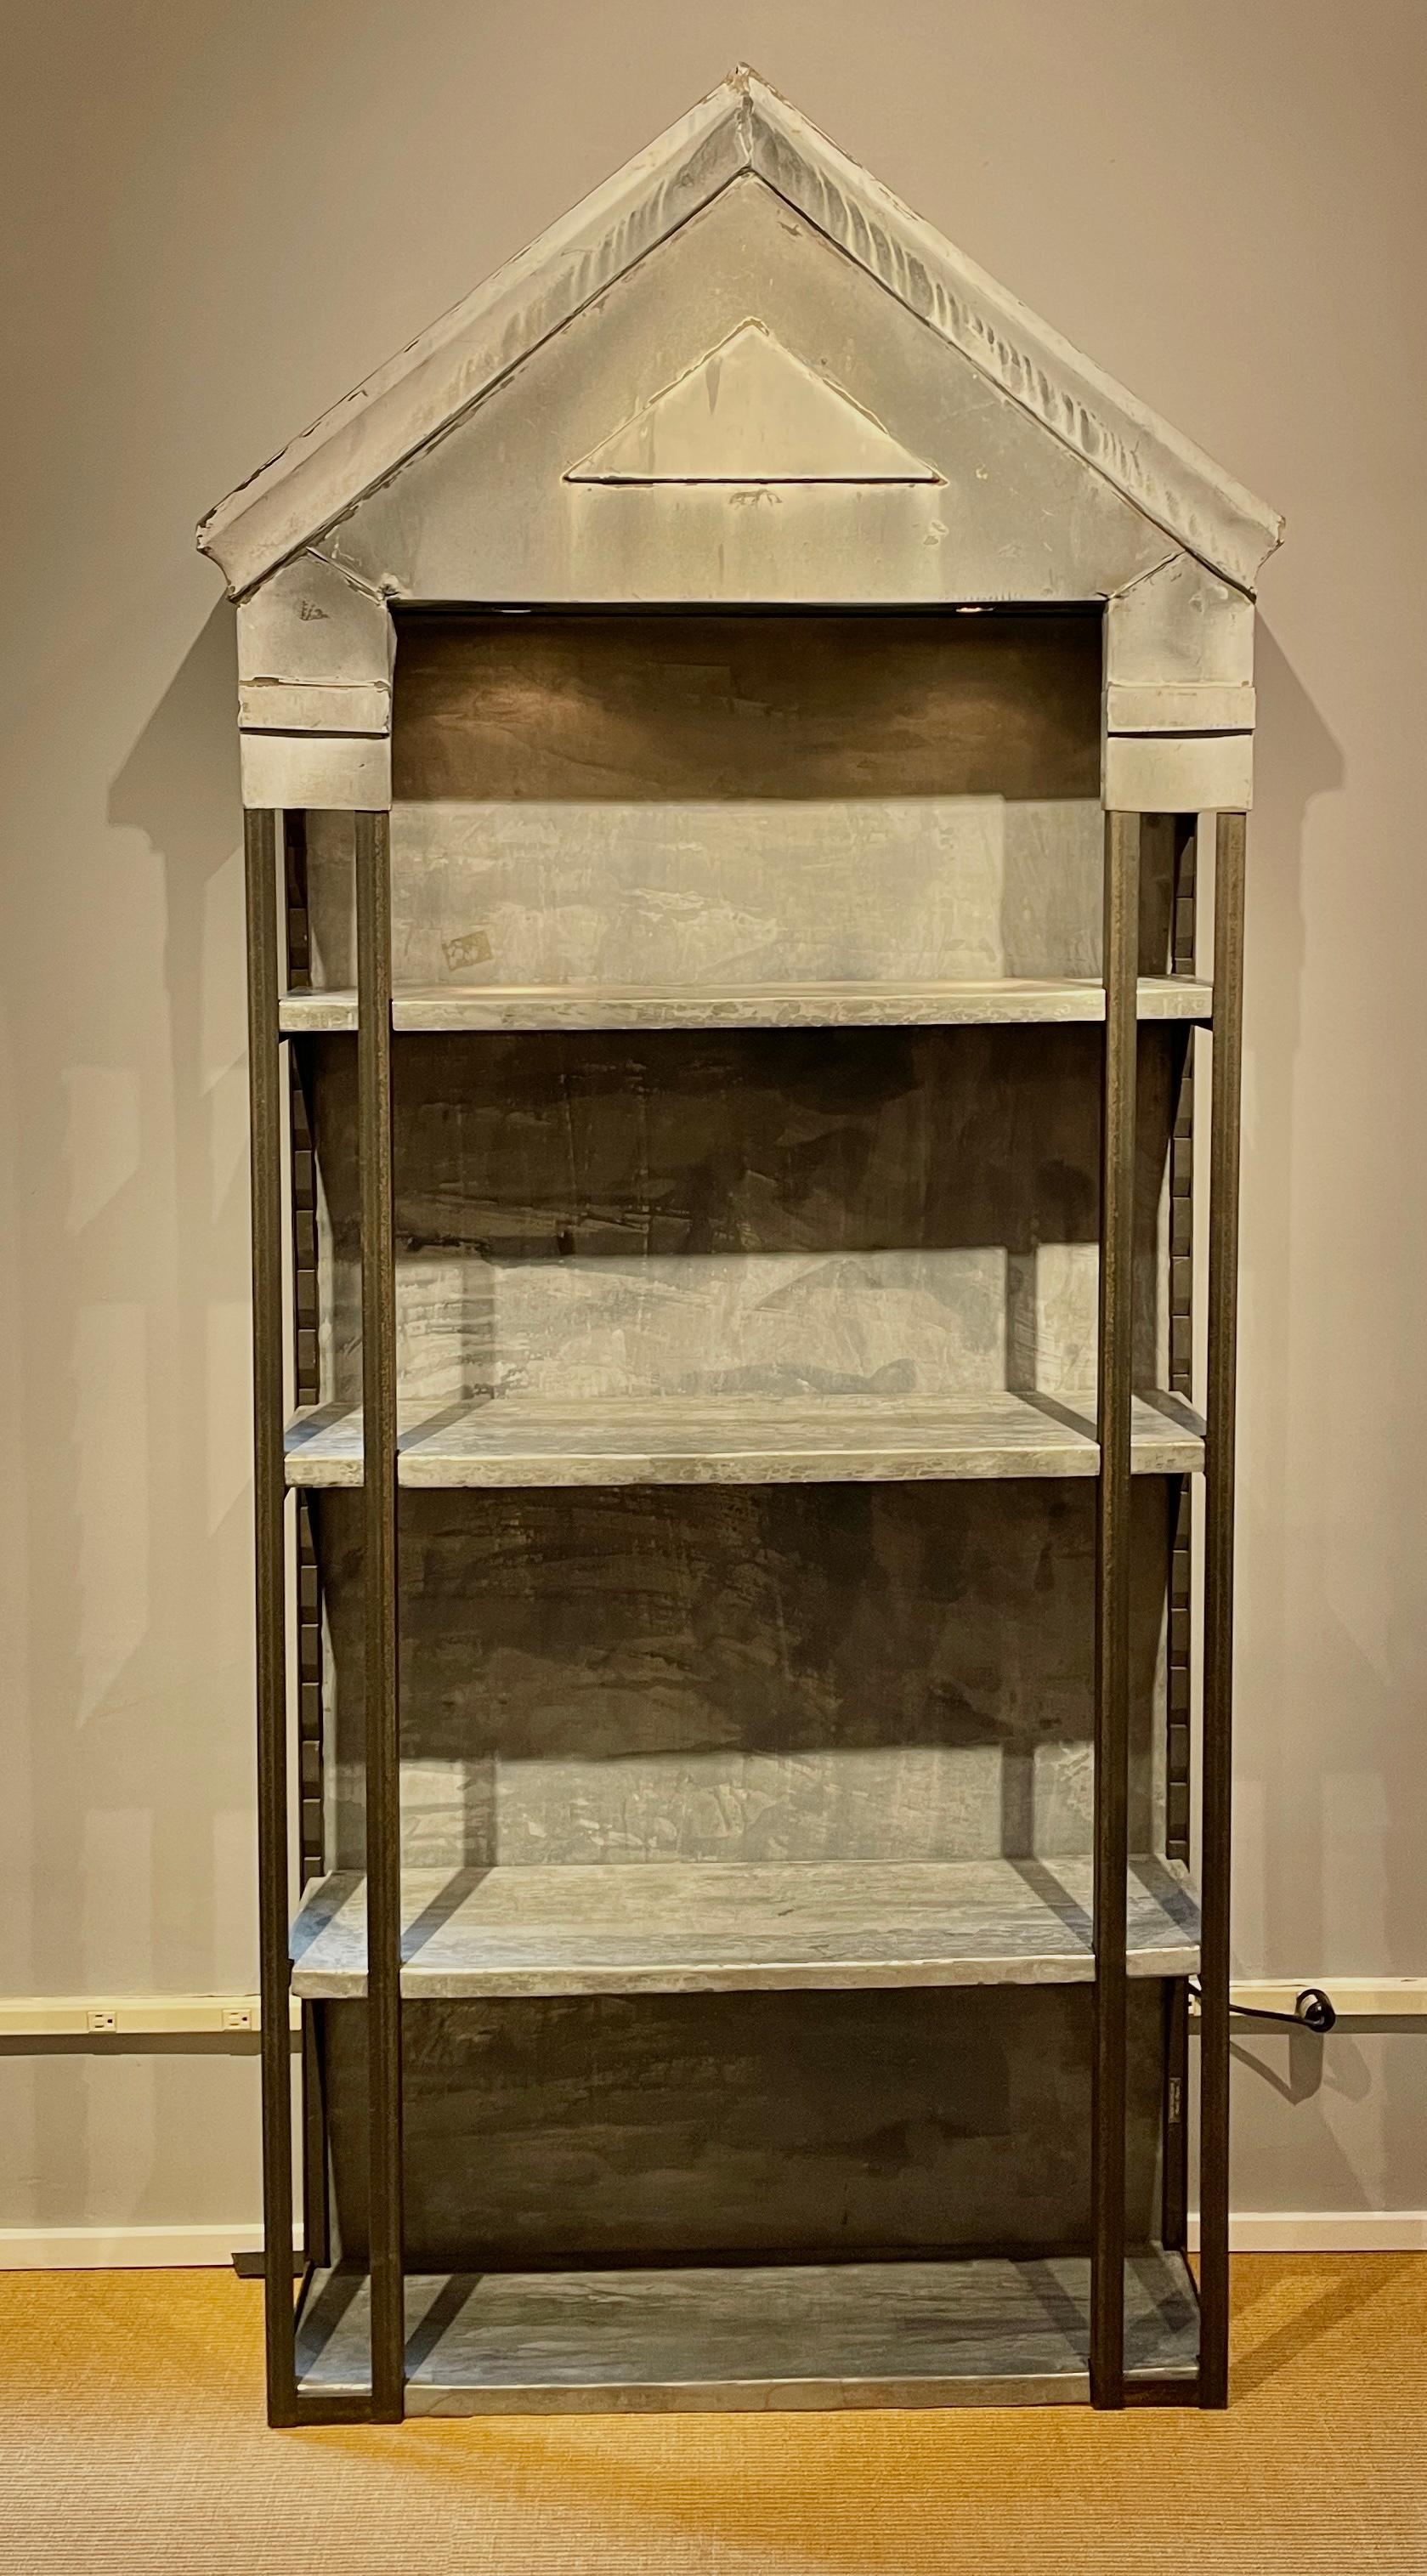 Unique shelving unit created by a Belgium designer, Francine Villier-Levy. This tall unit in created using a zinc window pediment from a Parisian building and adding a steel frame and zinc covered shelves. The shelves are all adjustable and the unit